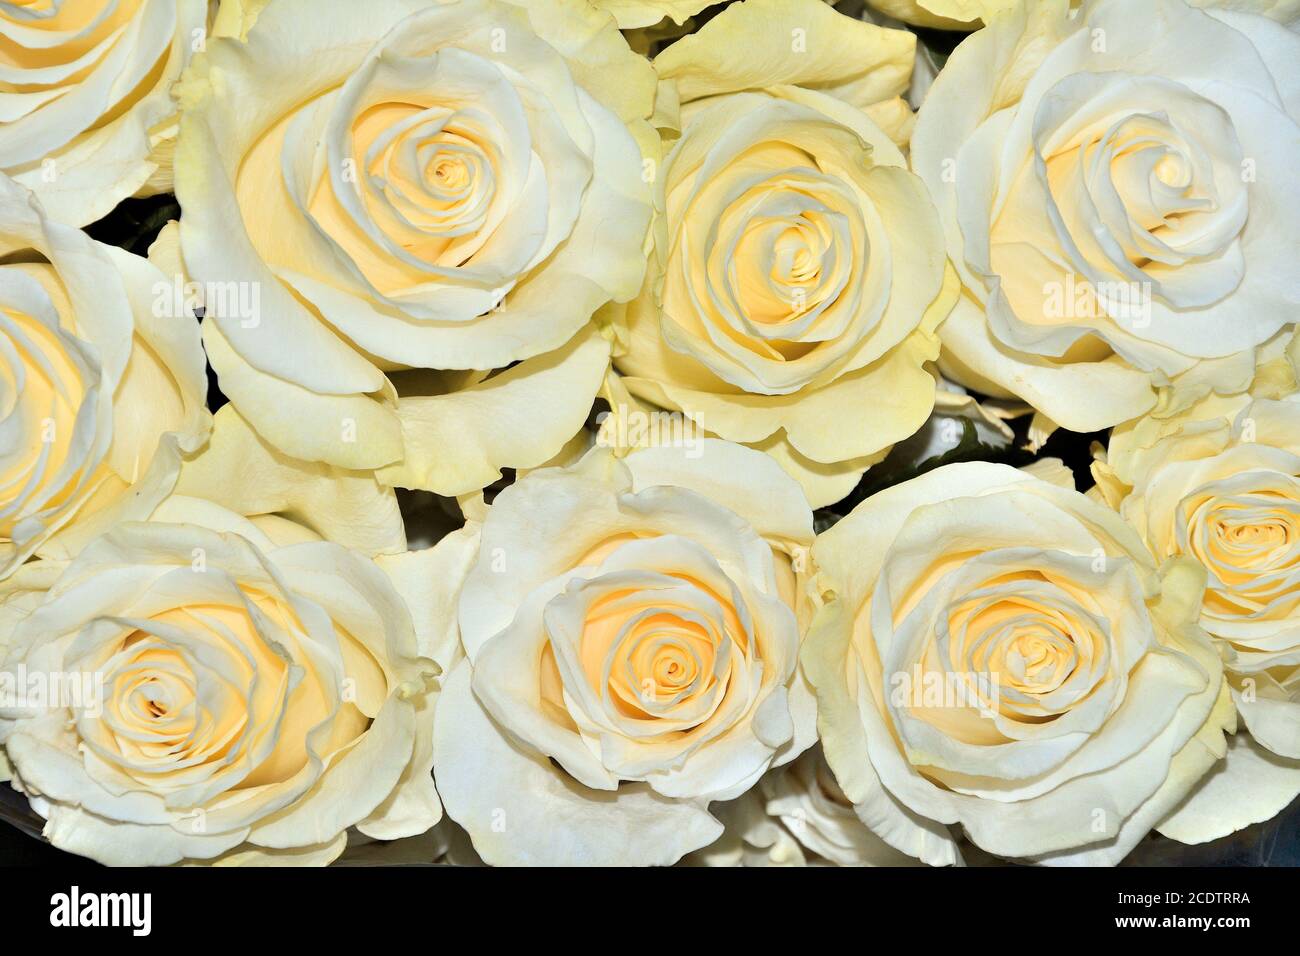 Beautiful floral background with amazing white roses with a yellow tint Stock Photo